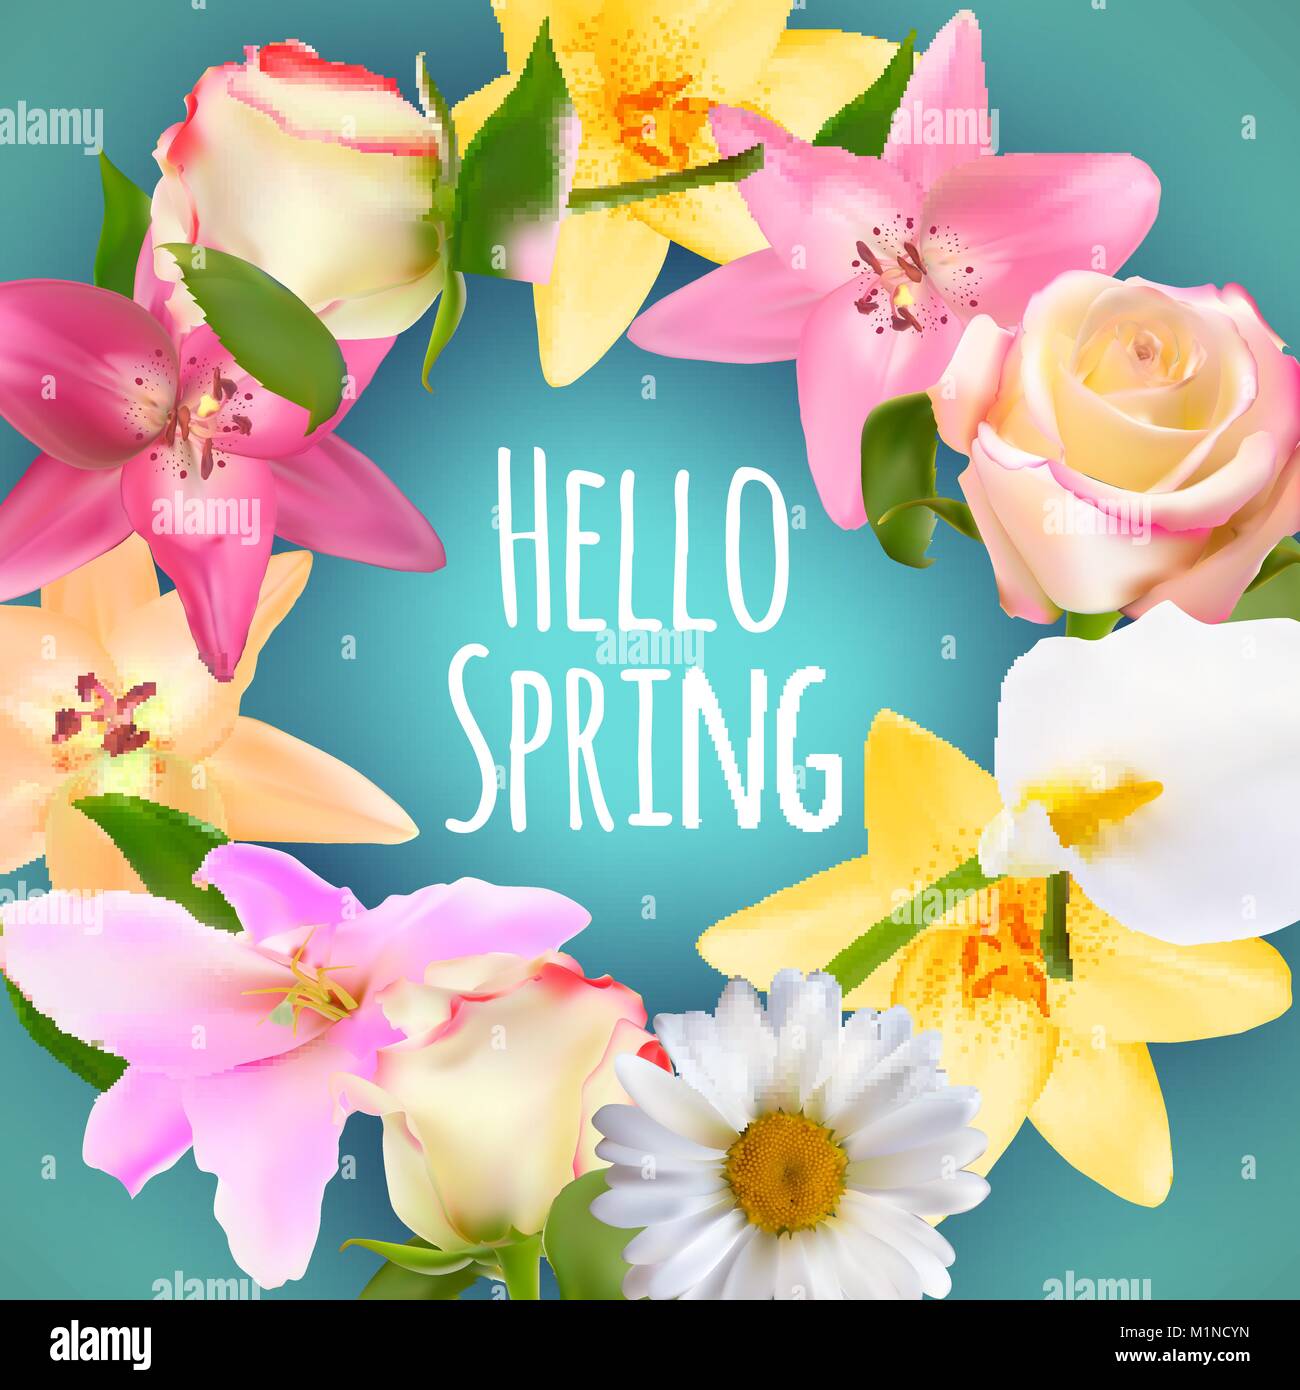 Hello Spring Banner Greetings Design Background with Colorful Flower